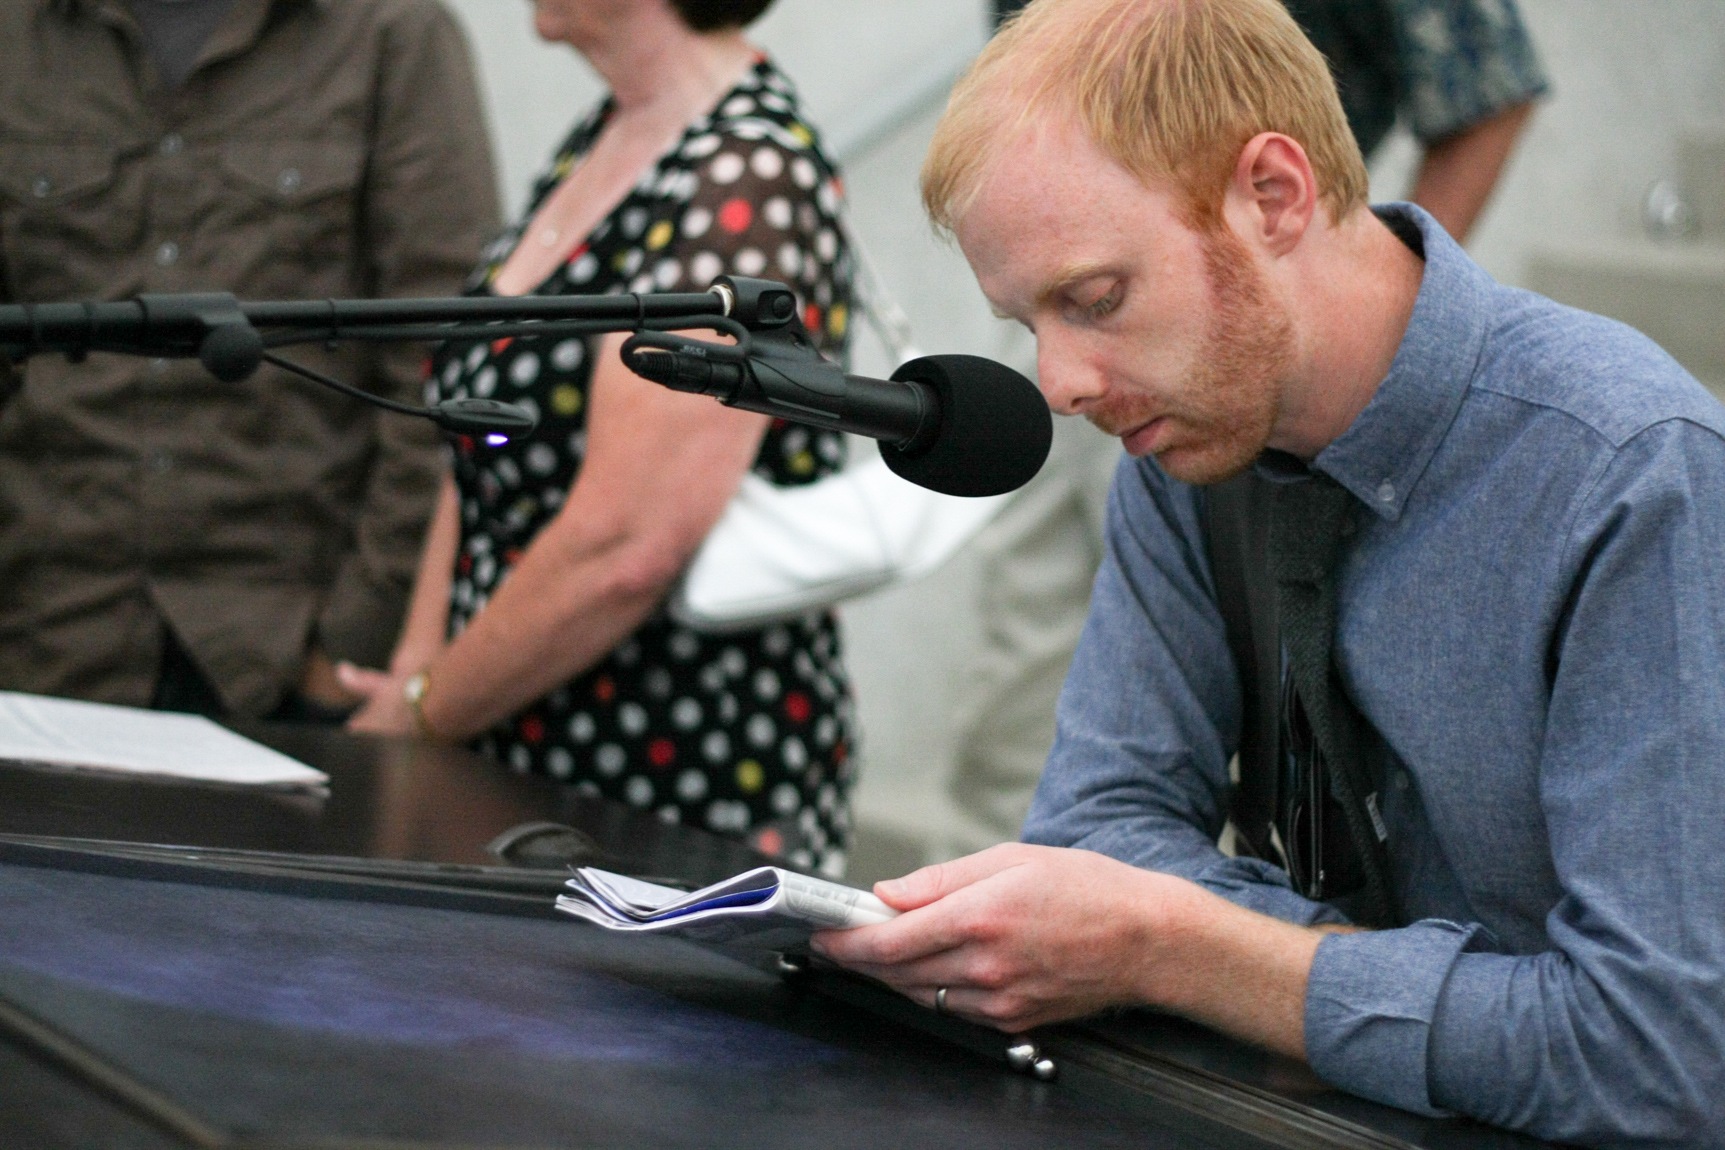 A visitor holds a book and leans against a table, a microphone in the foreground.